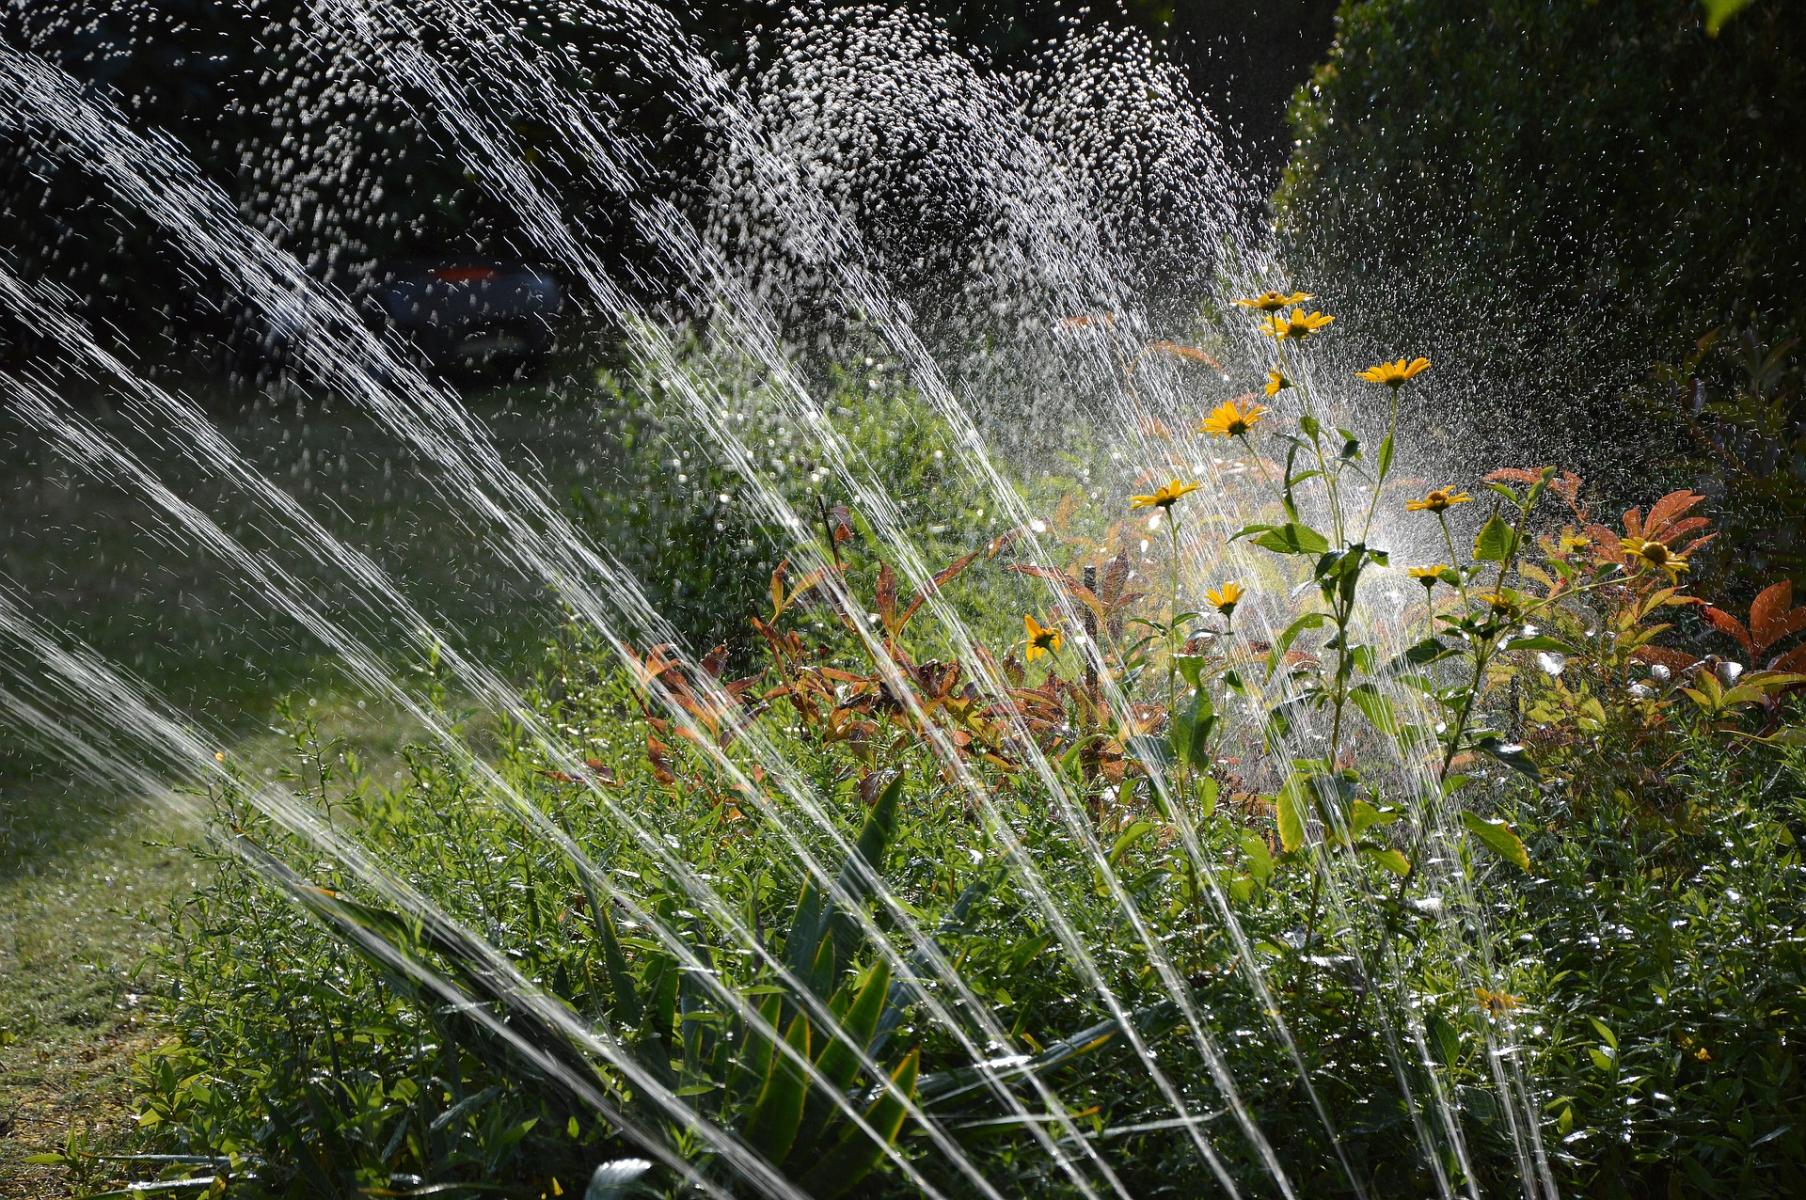 Oscillating sprinklers are one of the least efficient ways to water a landscape, due to the amount of water lost to evaporation. 